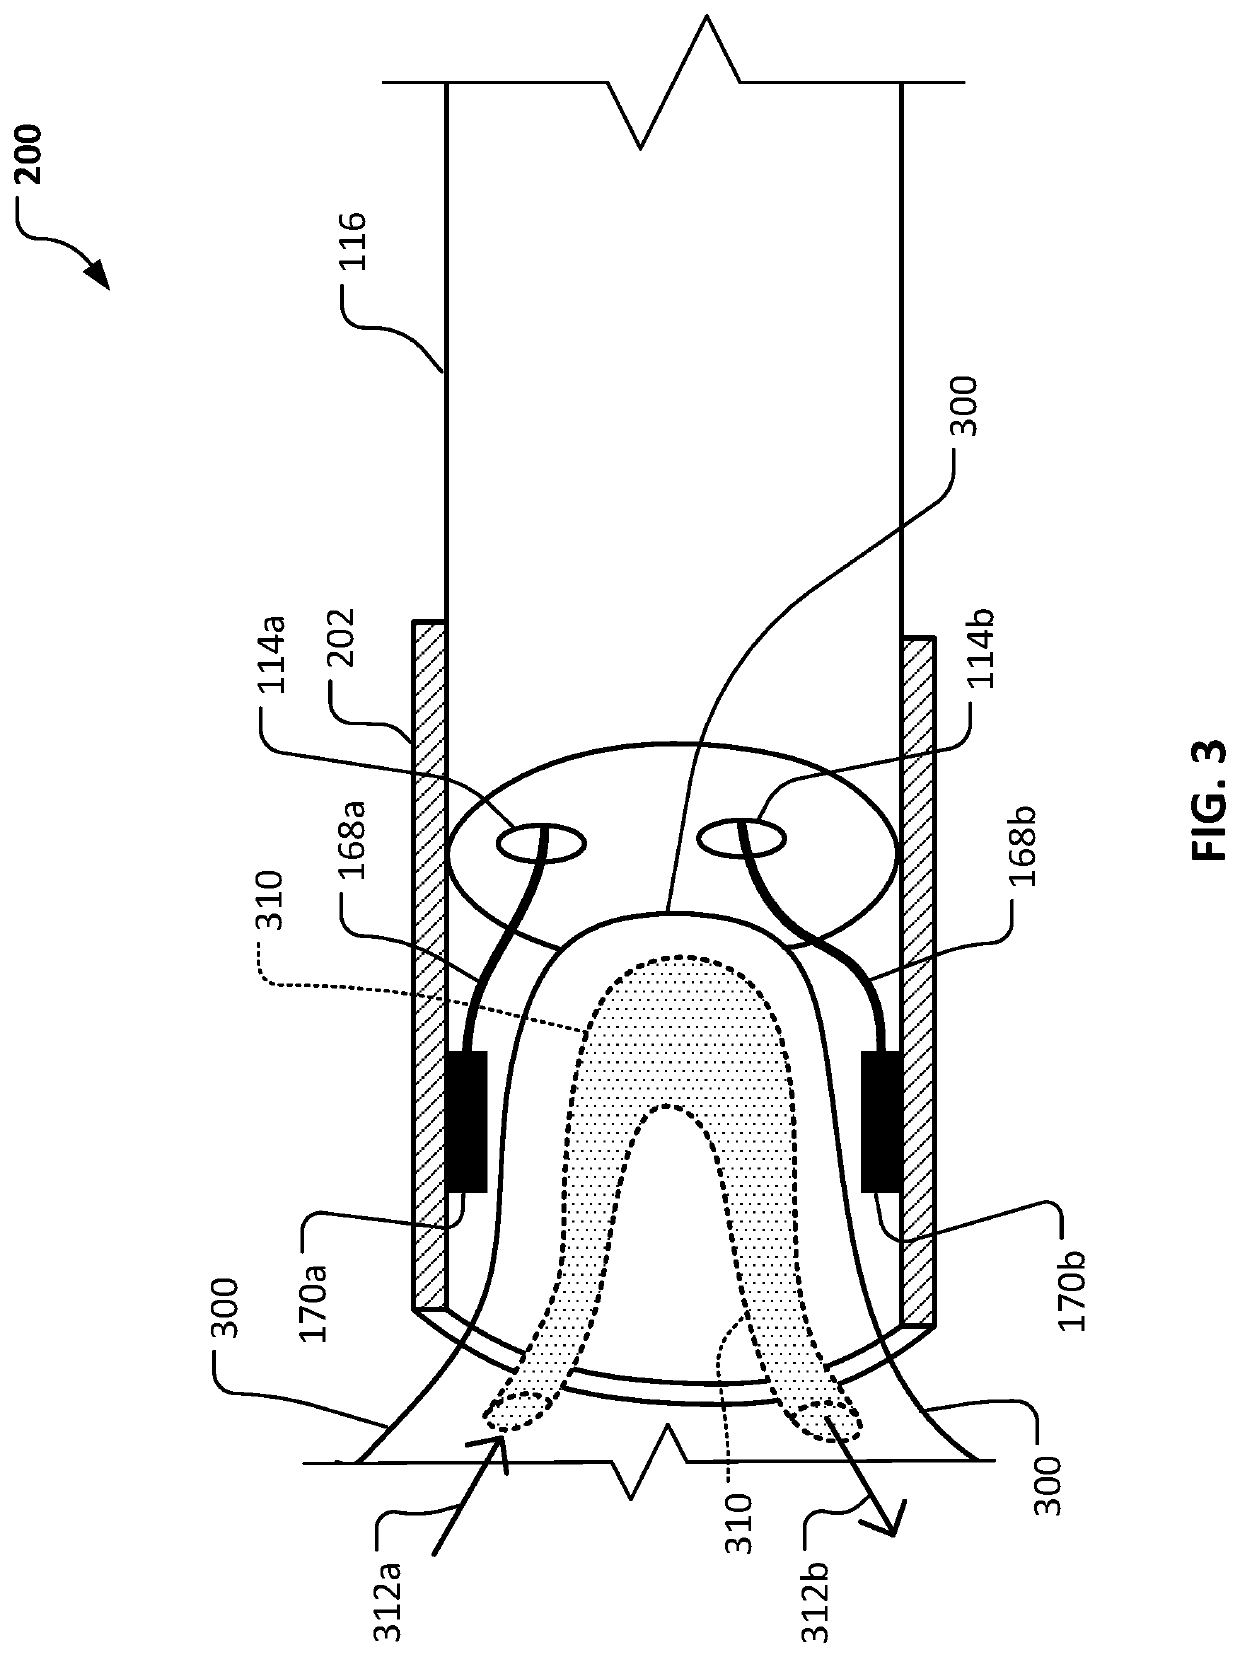 Thermal therapy systems and methods